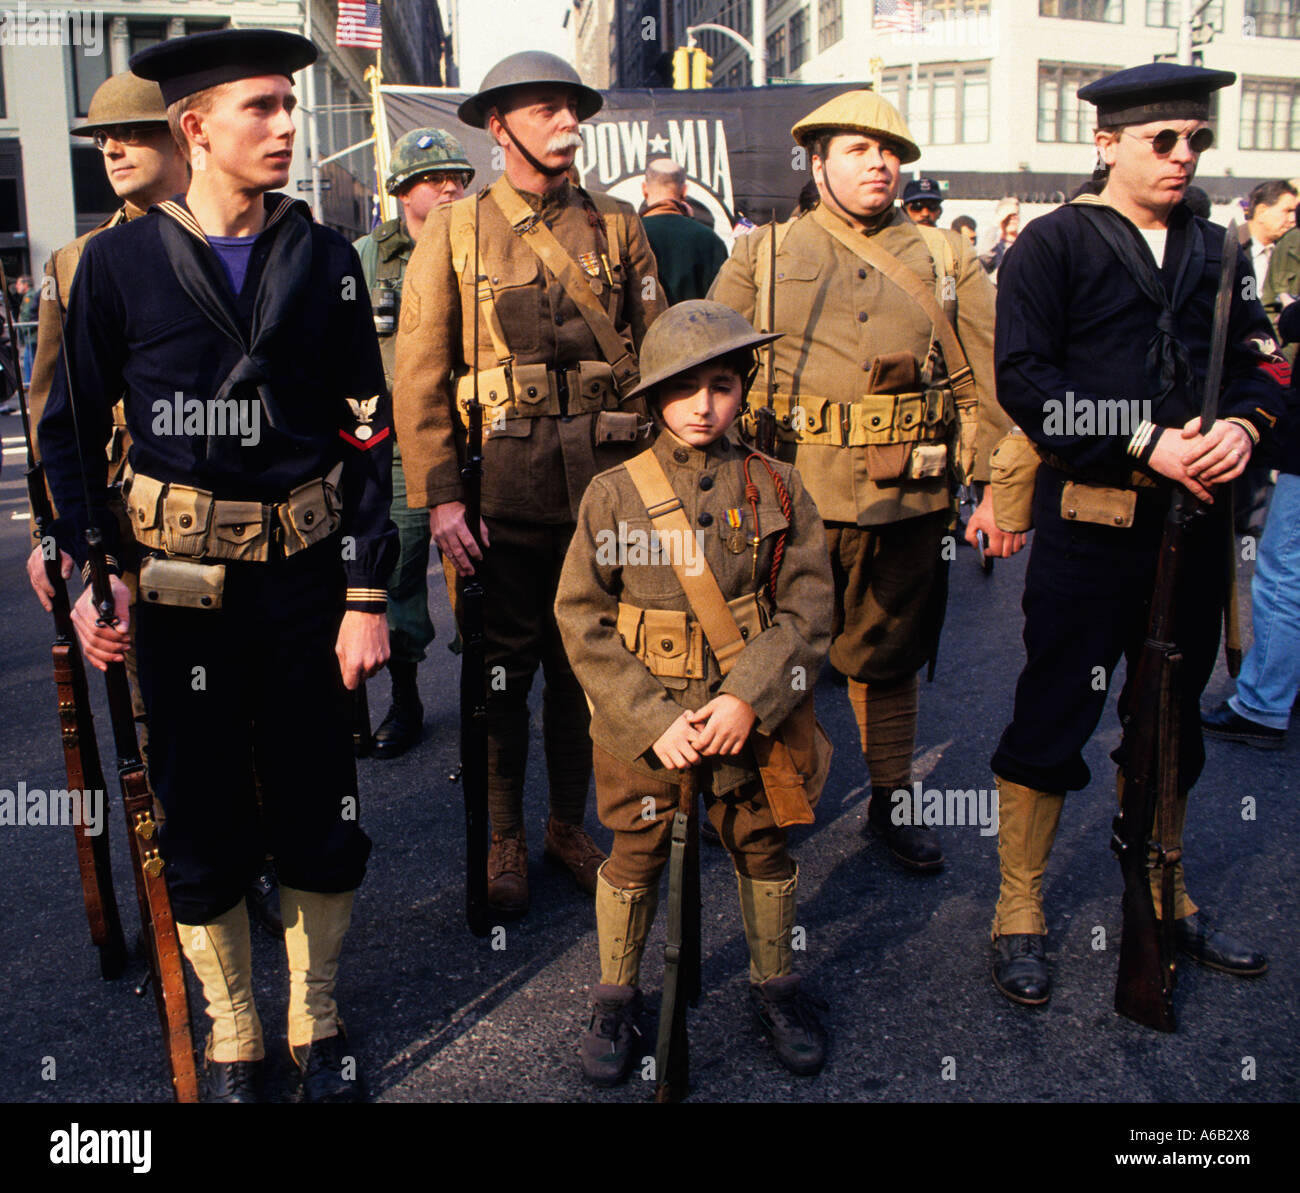 Soldiers: young boy, young men and old men, dressed in World War I uniforms for Veterans Day Parade, Armistice Day military parade, New York City, USA Stock Photo